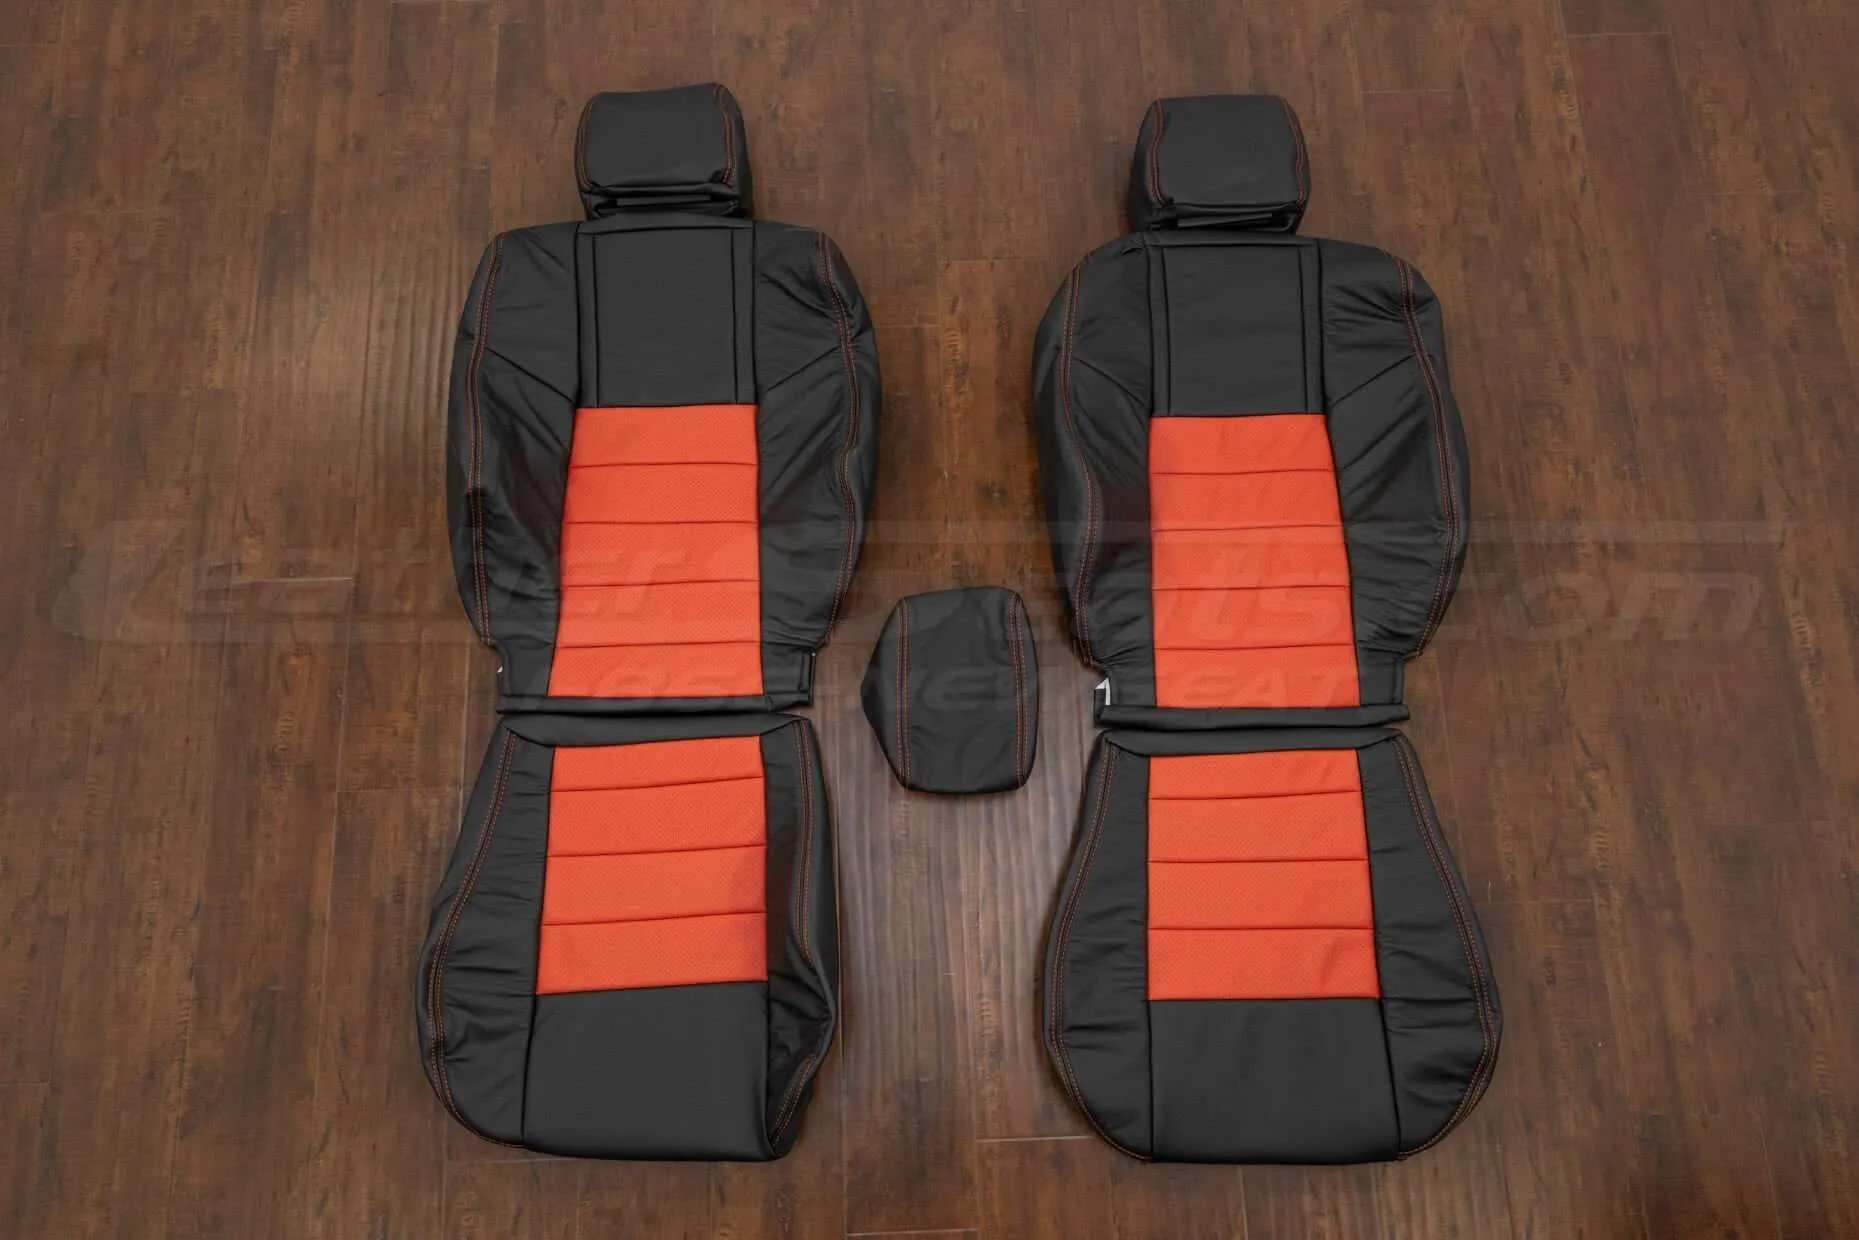 Dodge Challenger SRT-8 Leather Seat Kit -Black/Tangerine - Front seat upholstery w/ console lid cover